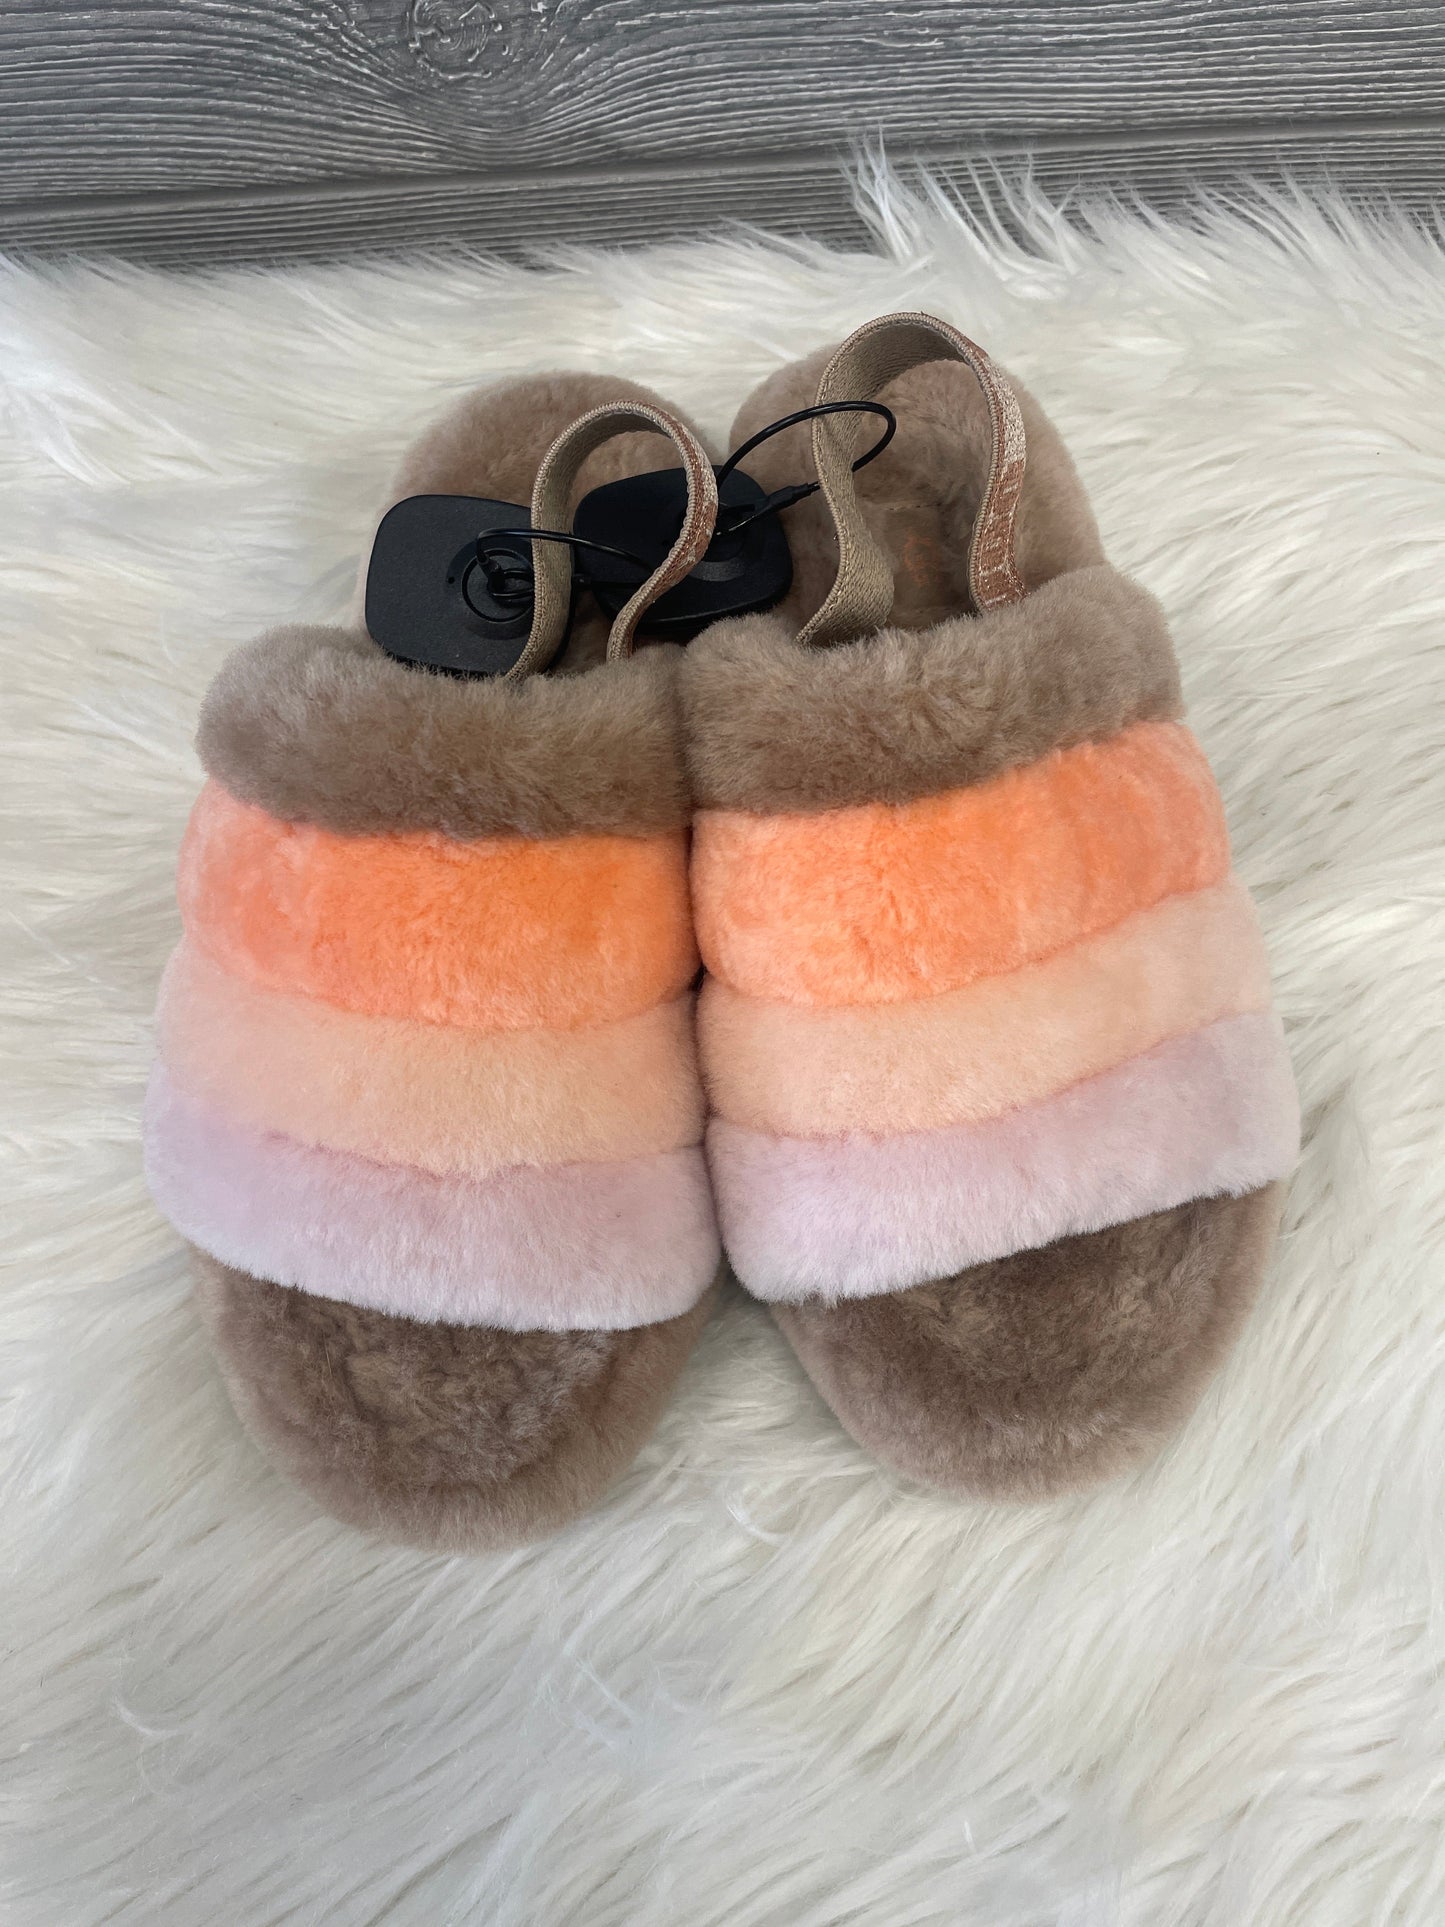 Brown & Pink Slippers Ugg, Size 8